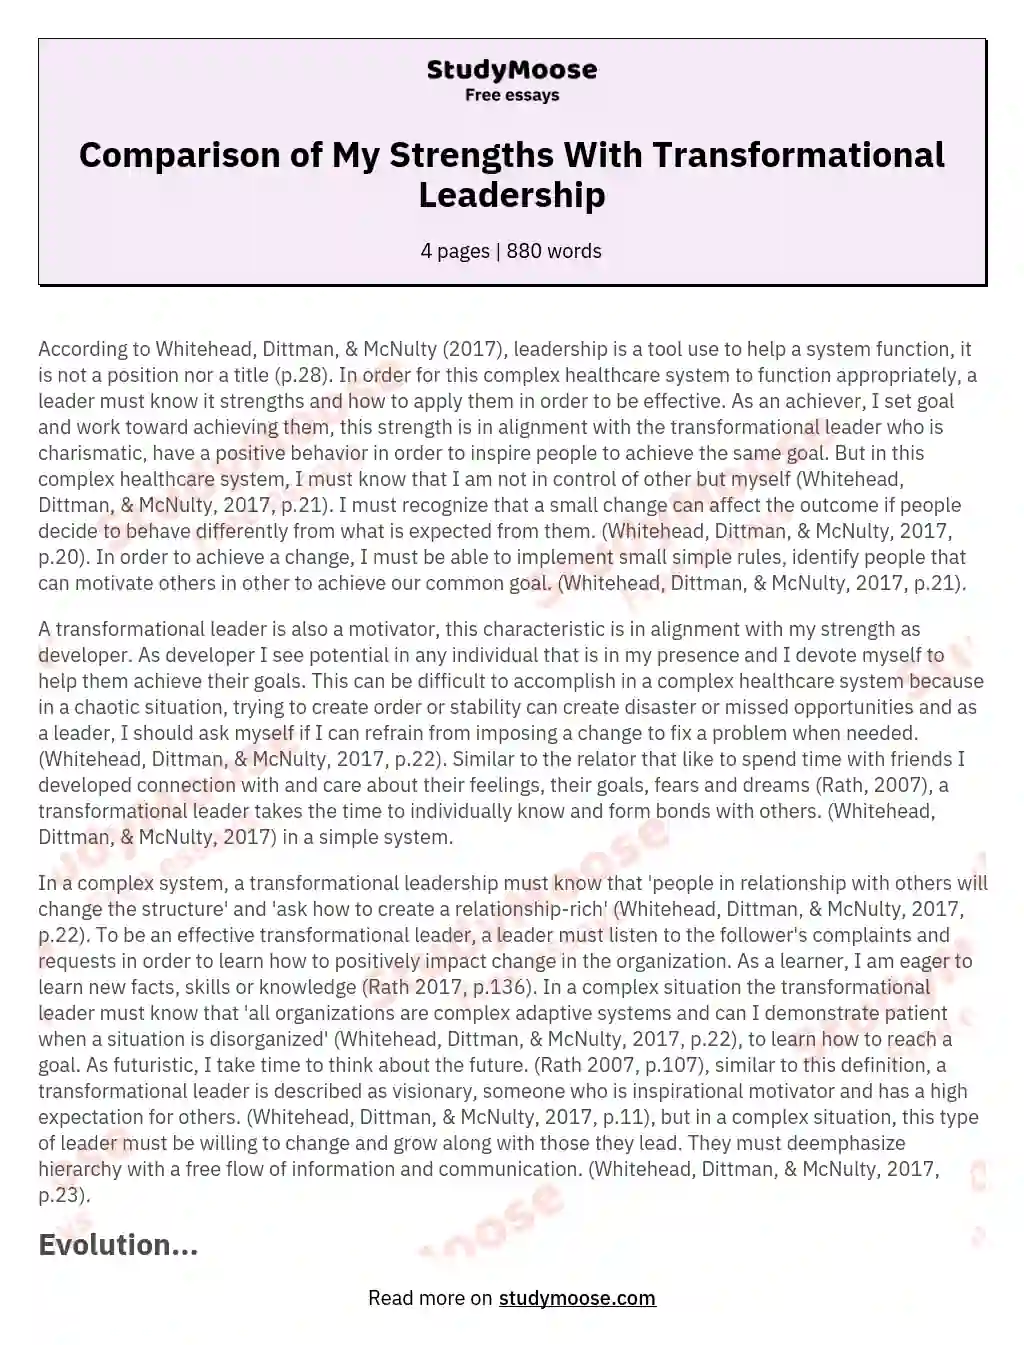 Comparison of My Strengths With Transformational Leadership essay